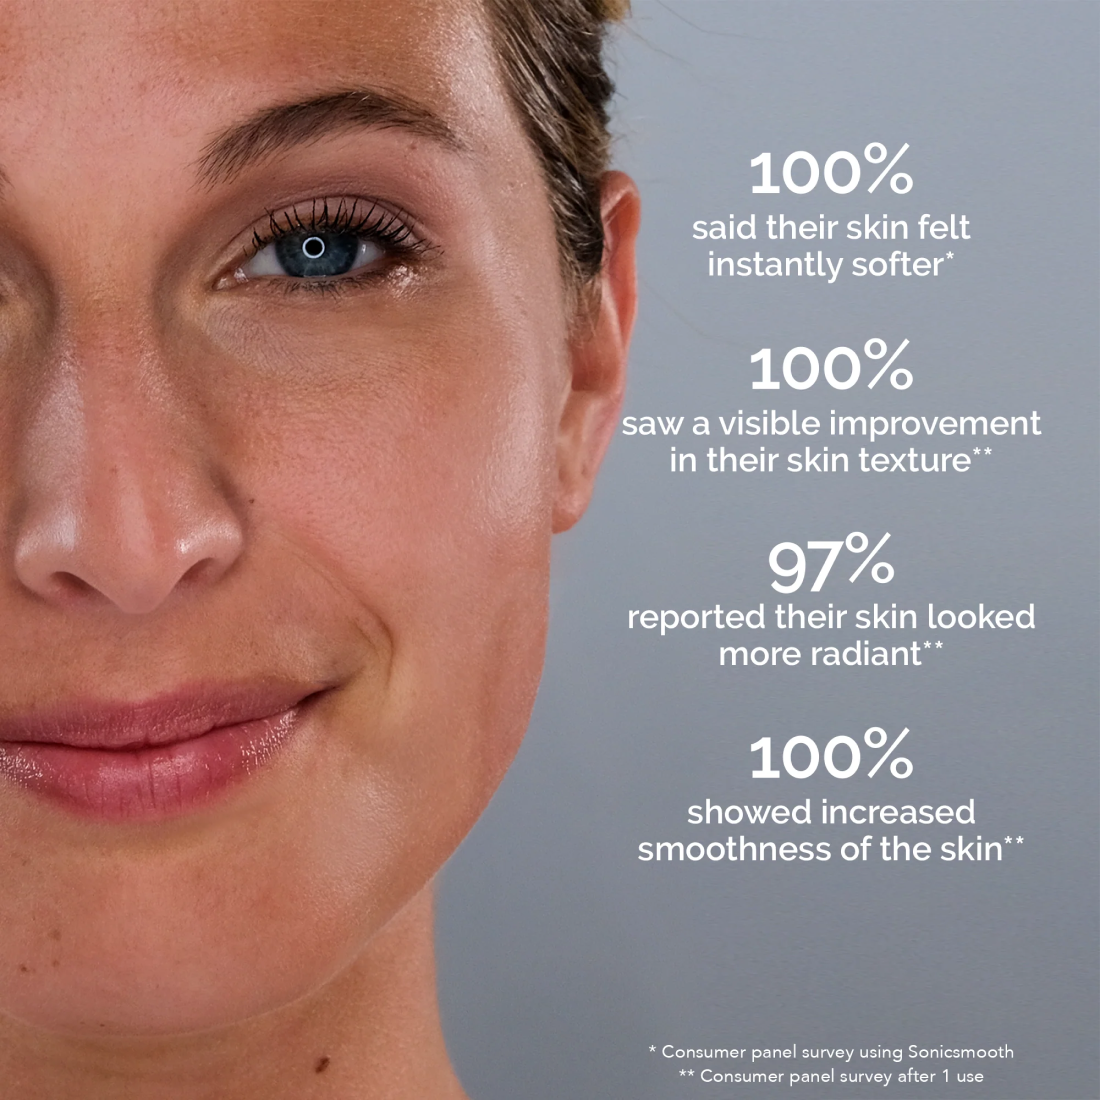 Lavender Lust . Close-up portrait of a woman with blue eyes smiling subtly against a gray background, accompanied by text highlighting skin improvement statistics using the 4 in 1 Dermaplaning & Post Treatment System from Michael Todd Beauty.